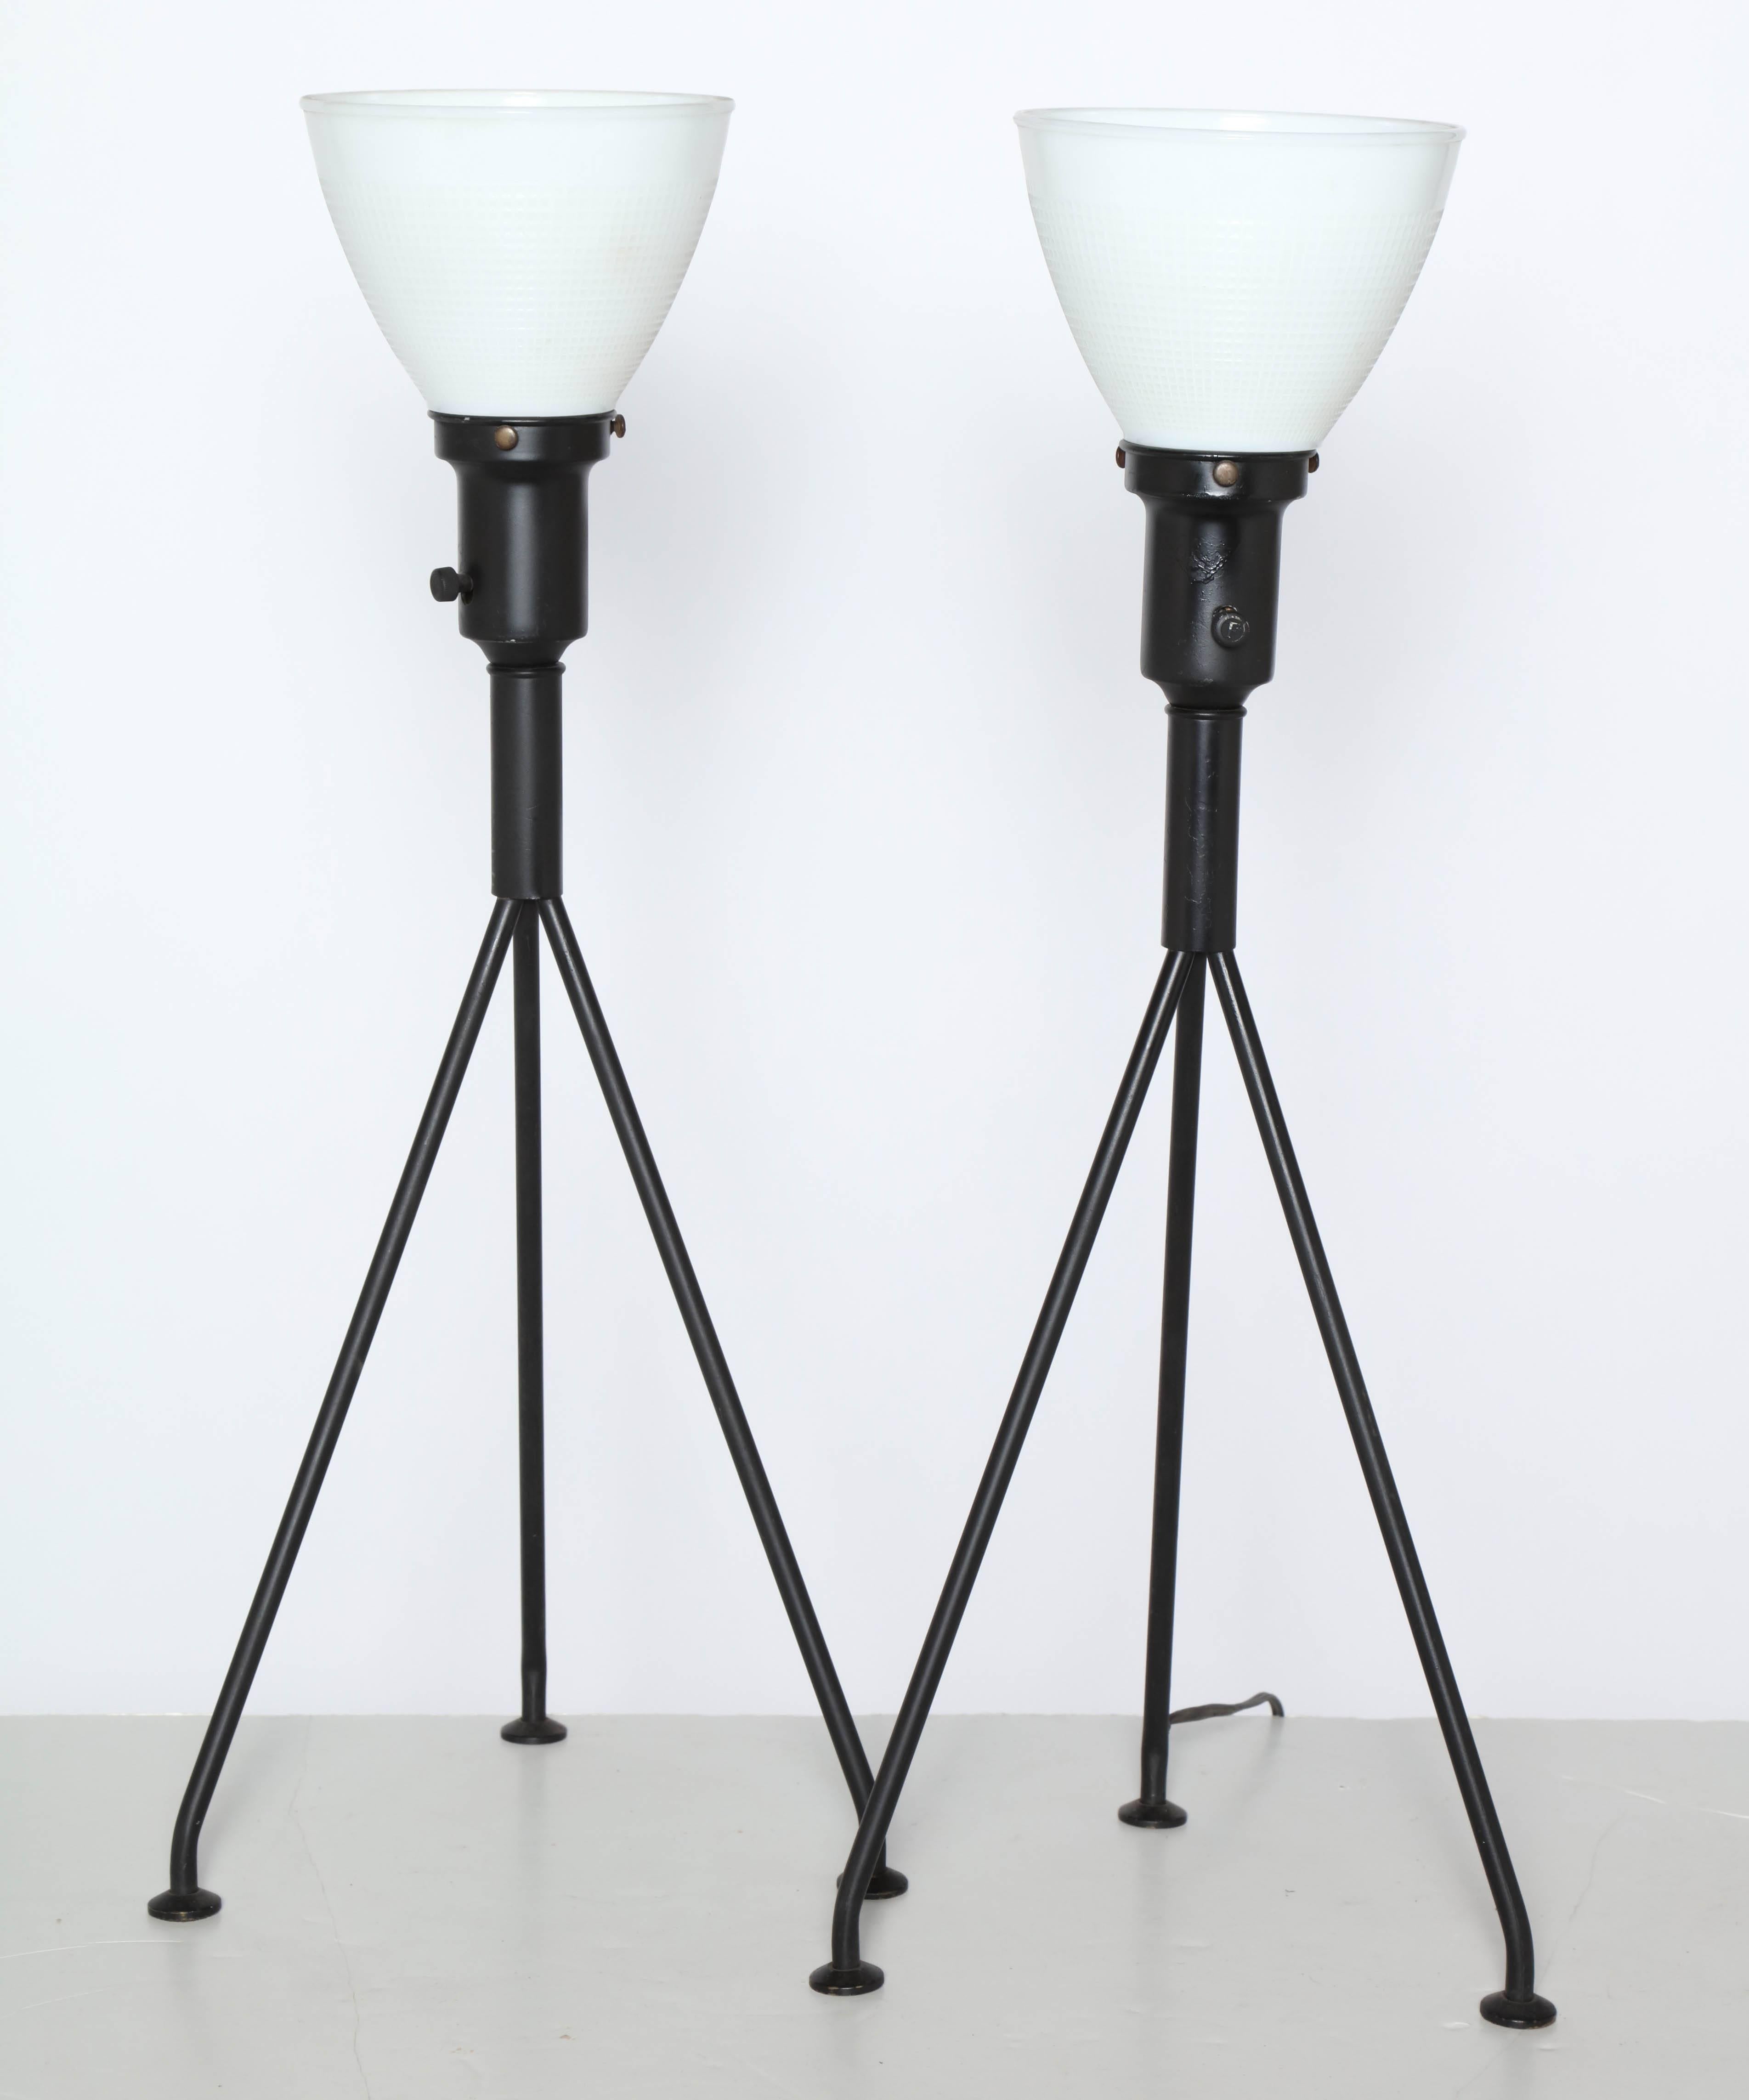 Pair of Gerald Thurston for Lightolier black and white table lamps, 1950s. Featuring black enameled steel tripod legs, socket and neck. With white milk glass liner shades and brass feet. For use with liner shades and with or without lamp shades.